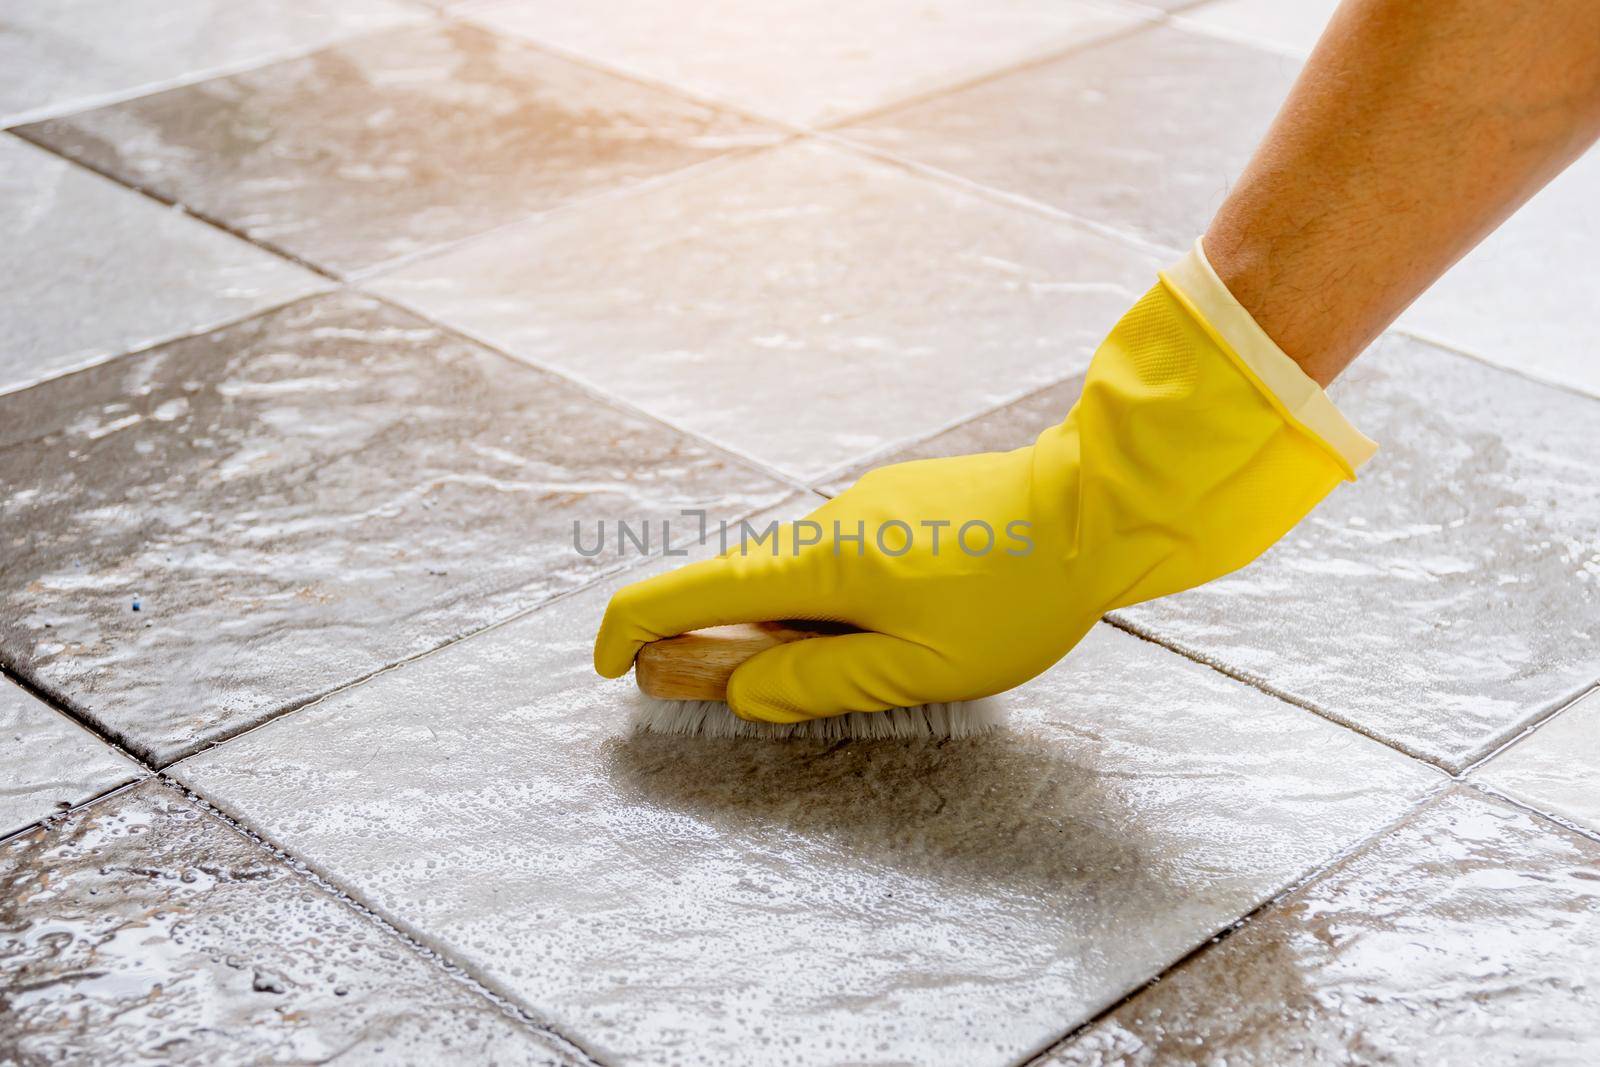 Hands wearing yellow rubber gloves are using a wooden floor scrubber to scrub the tile floor with a floor cleaner.